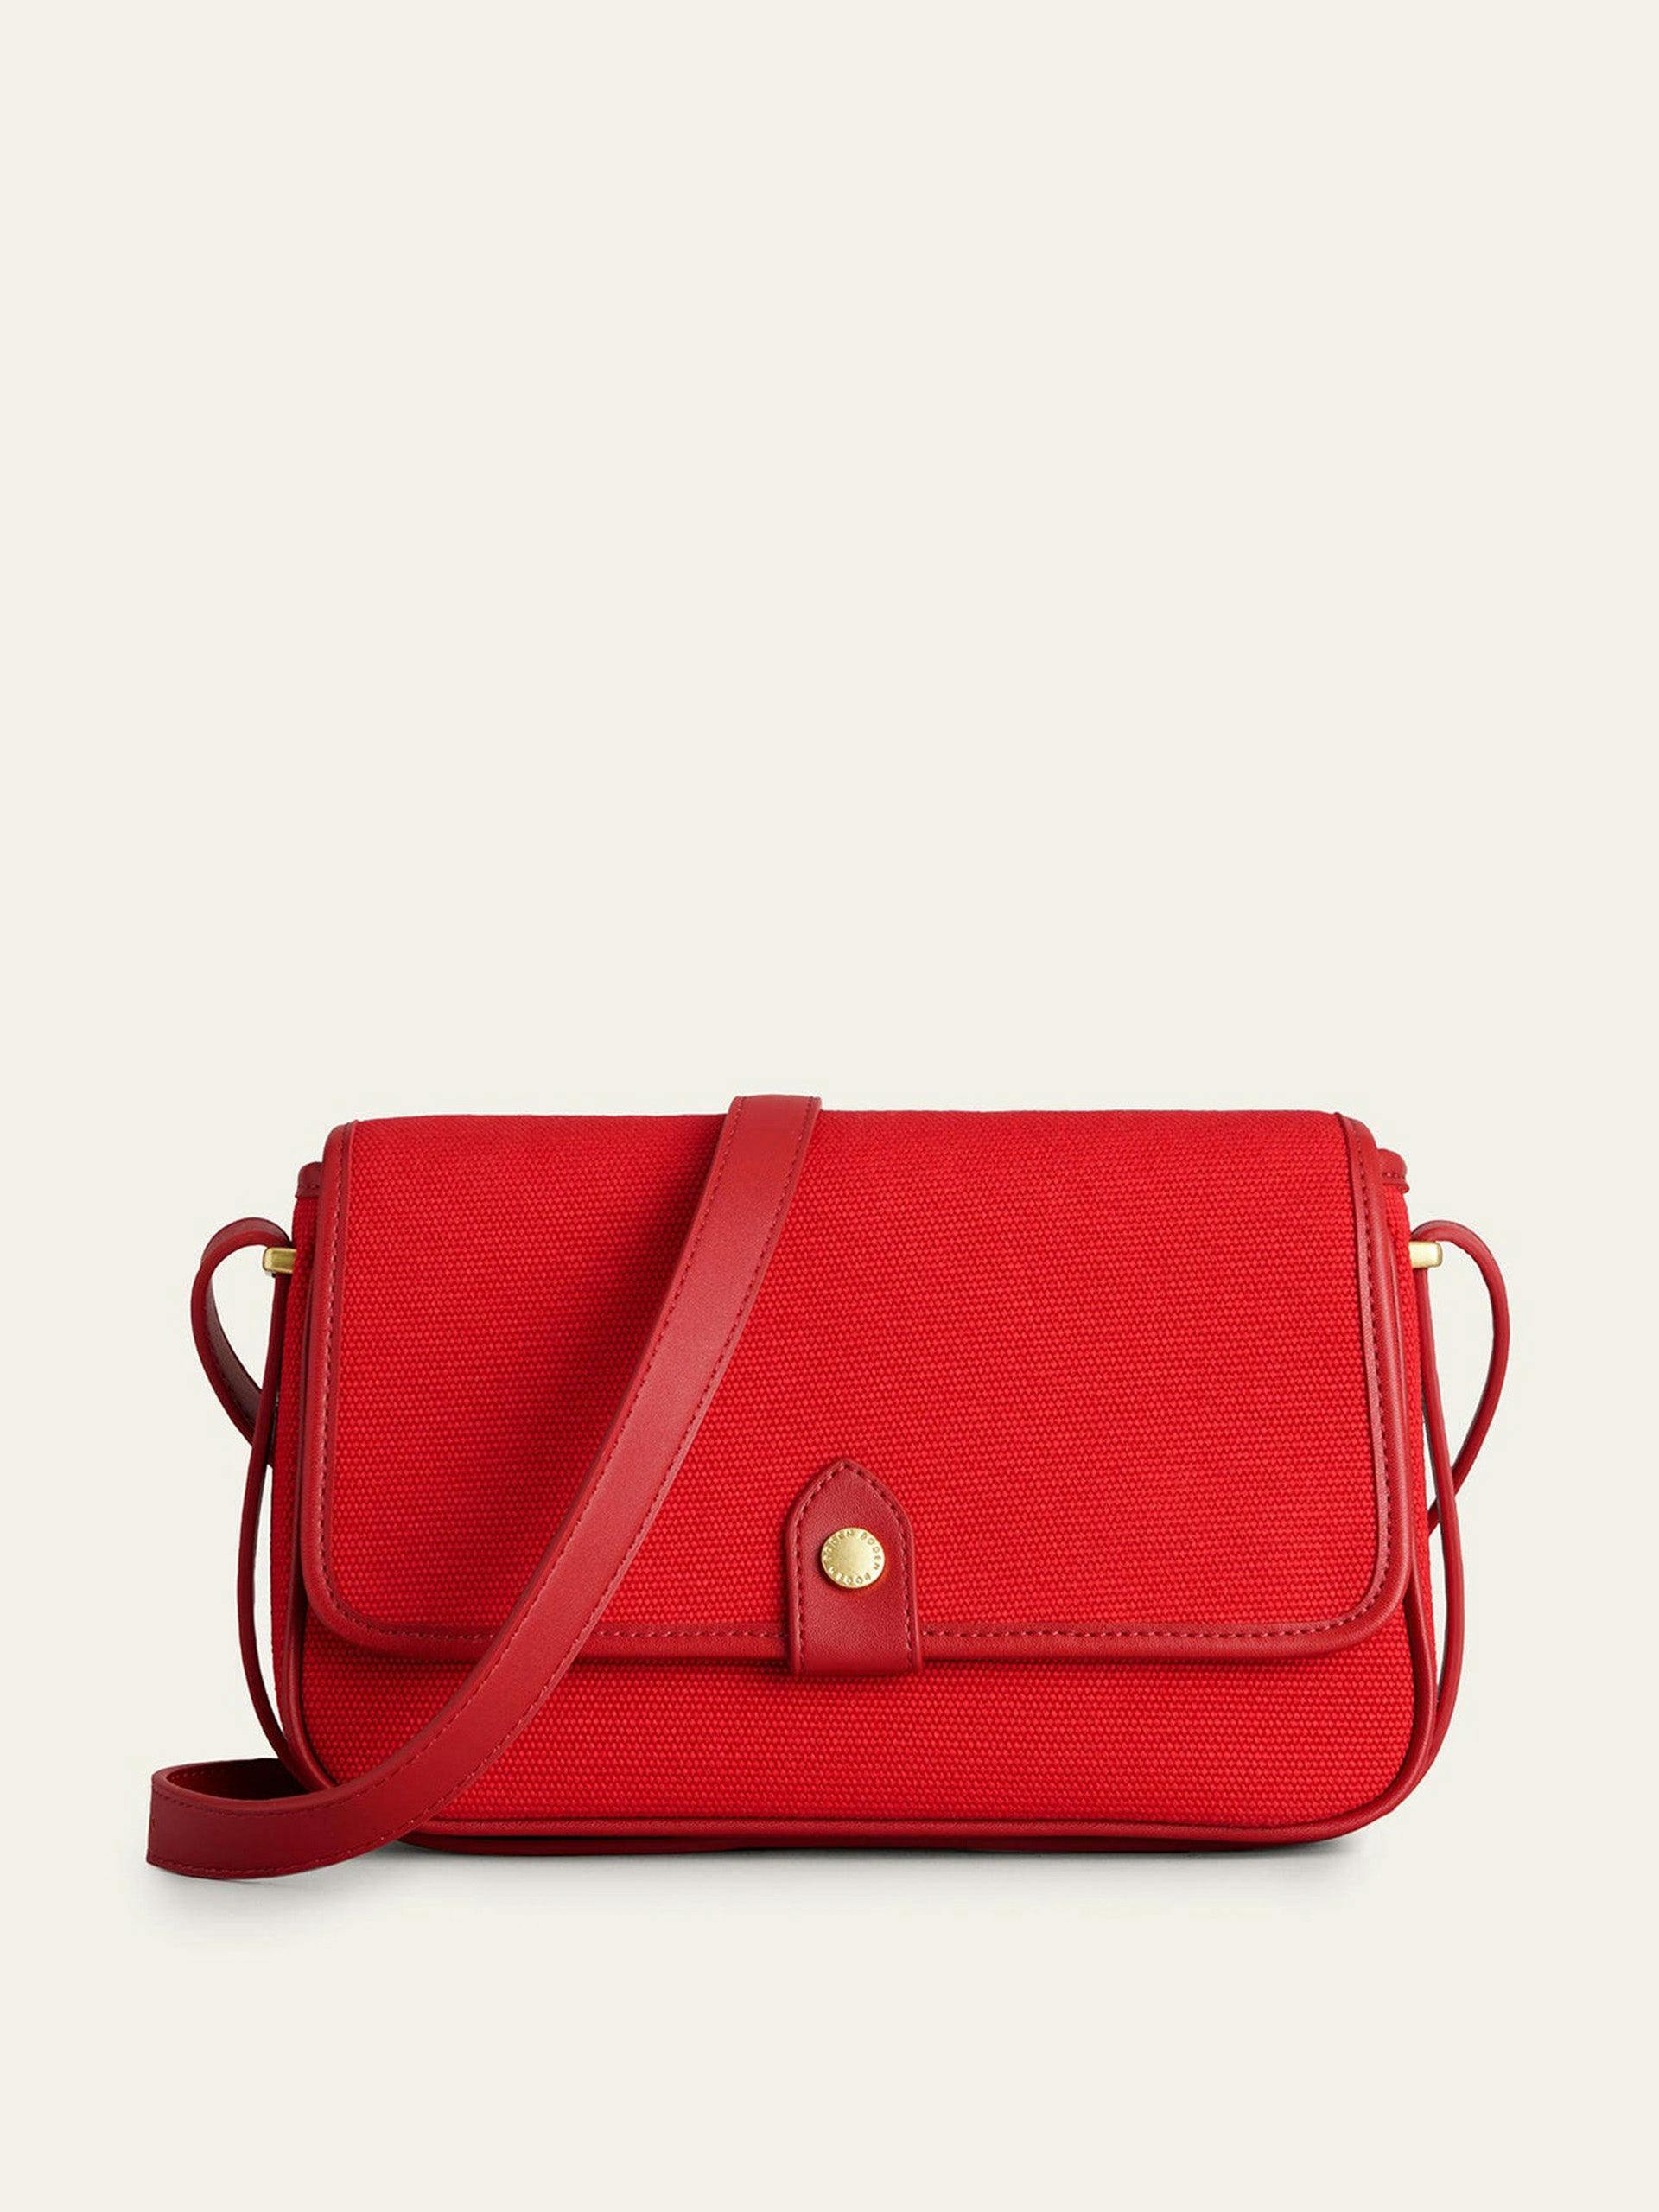 Red structured crossbody bag